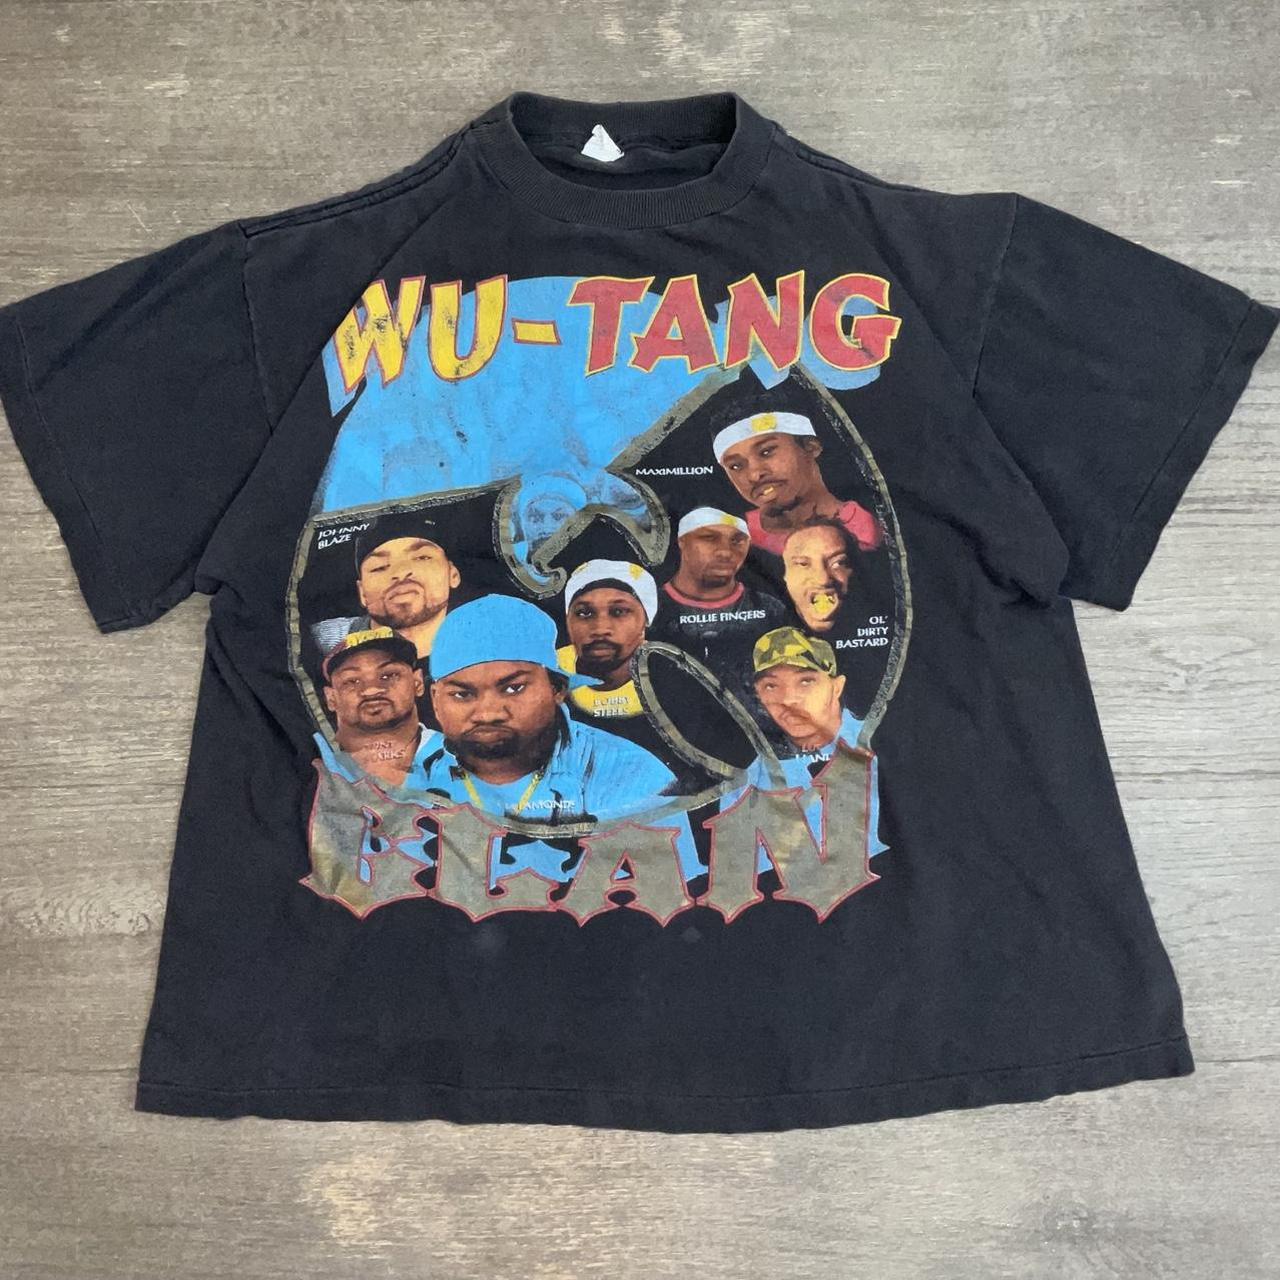 Wu tang rap tee hearing offer do not buy not real